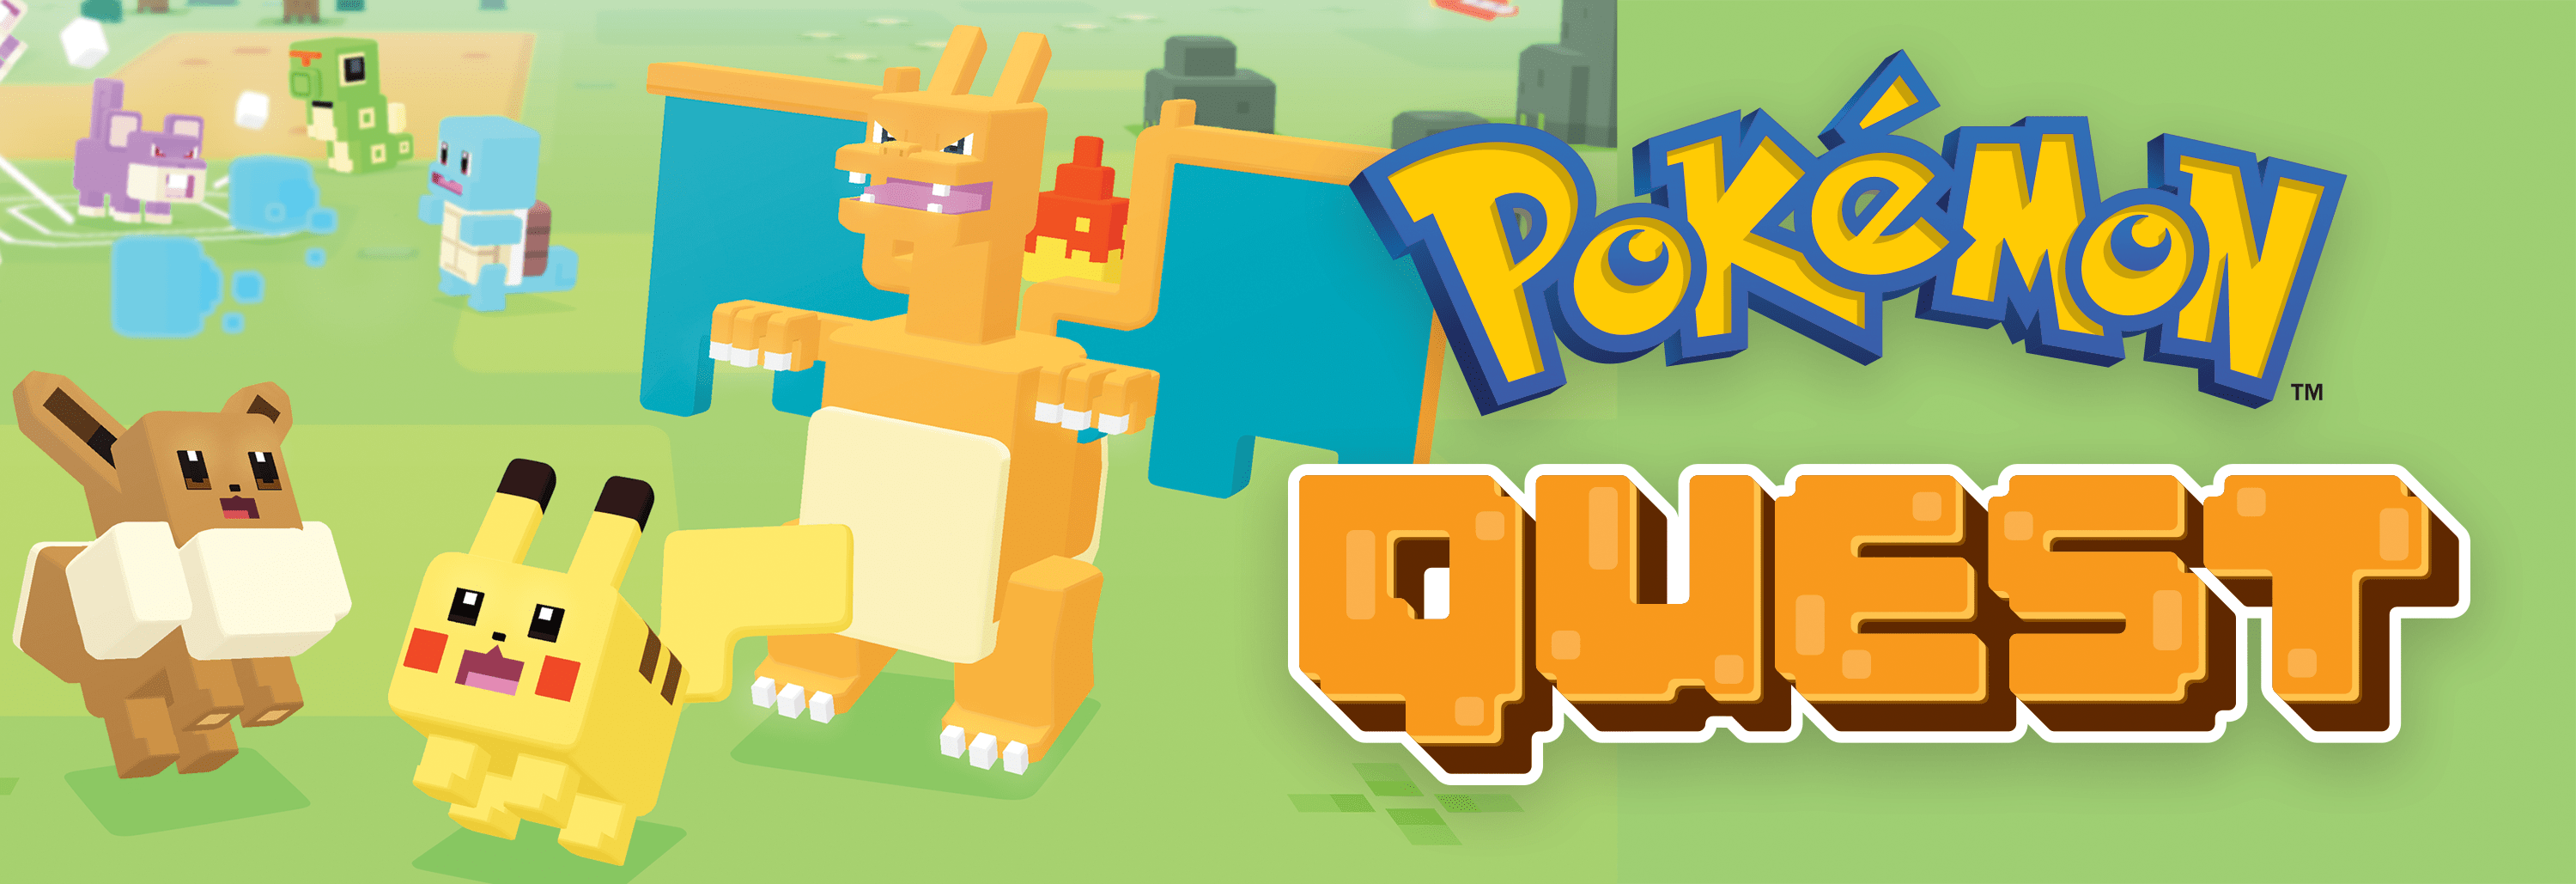 Is Pokemon Quest on 3ds?